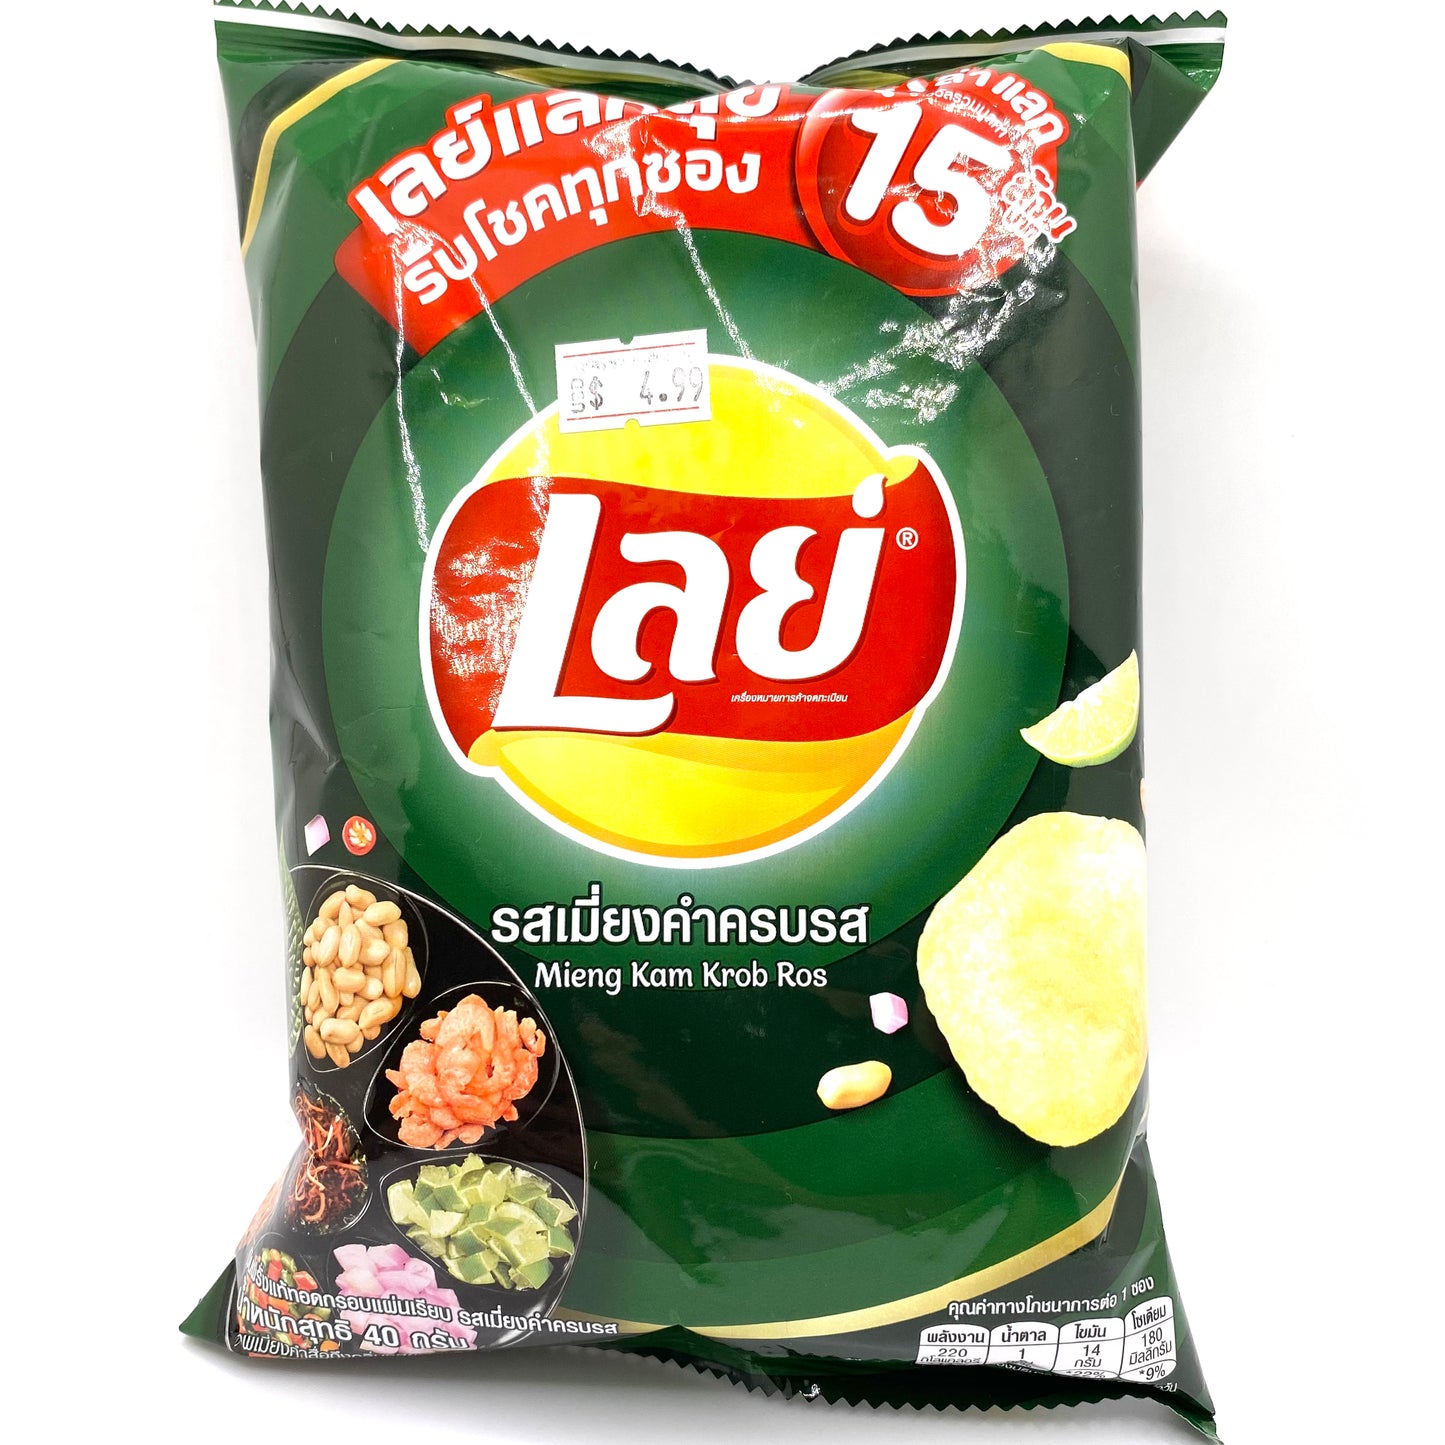 Lays Full Meing flavor (Thailand)